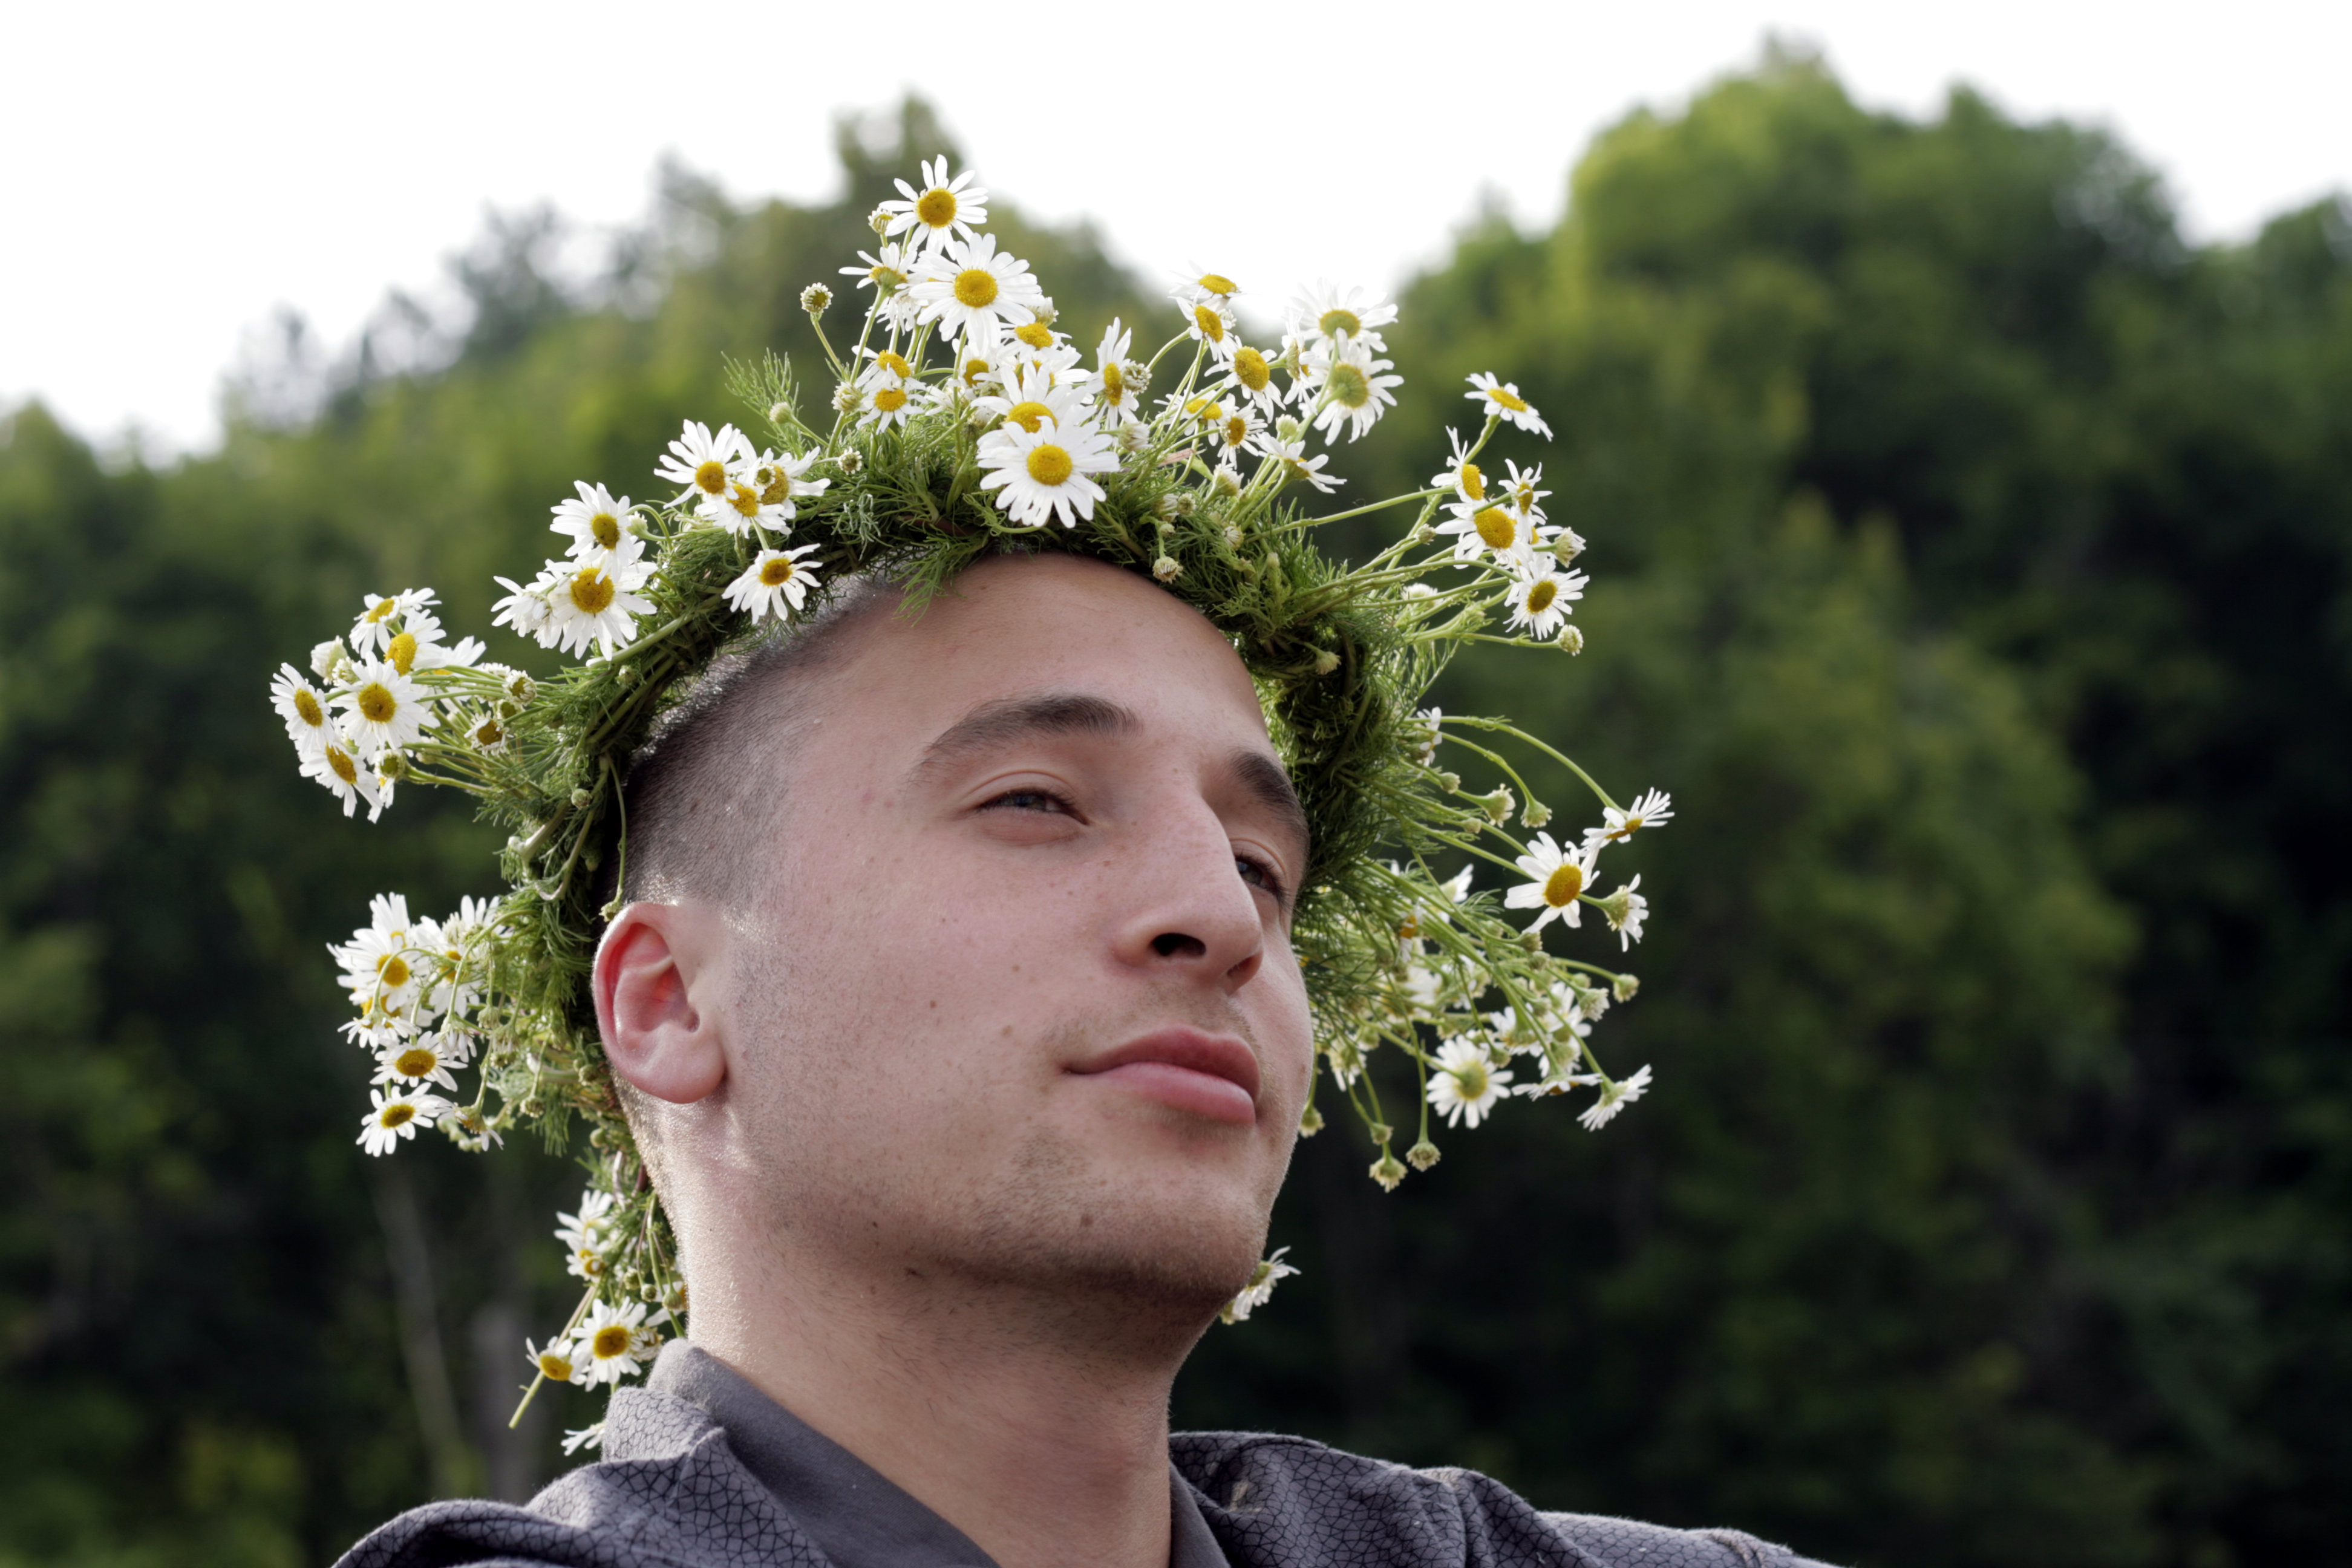 Man with flower crown photo